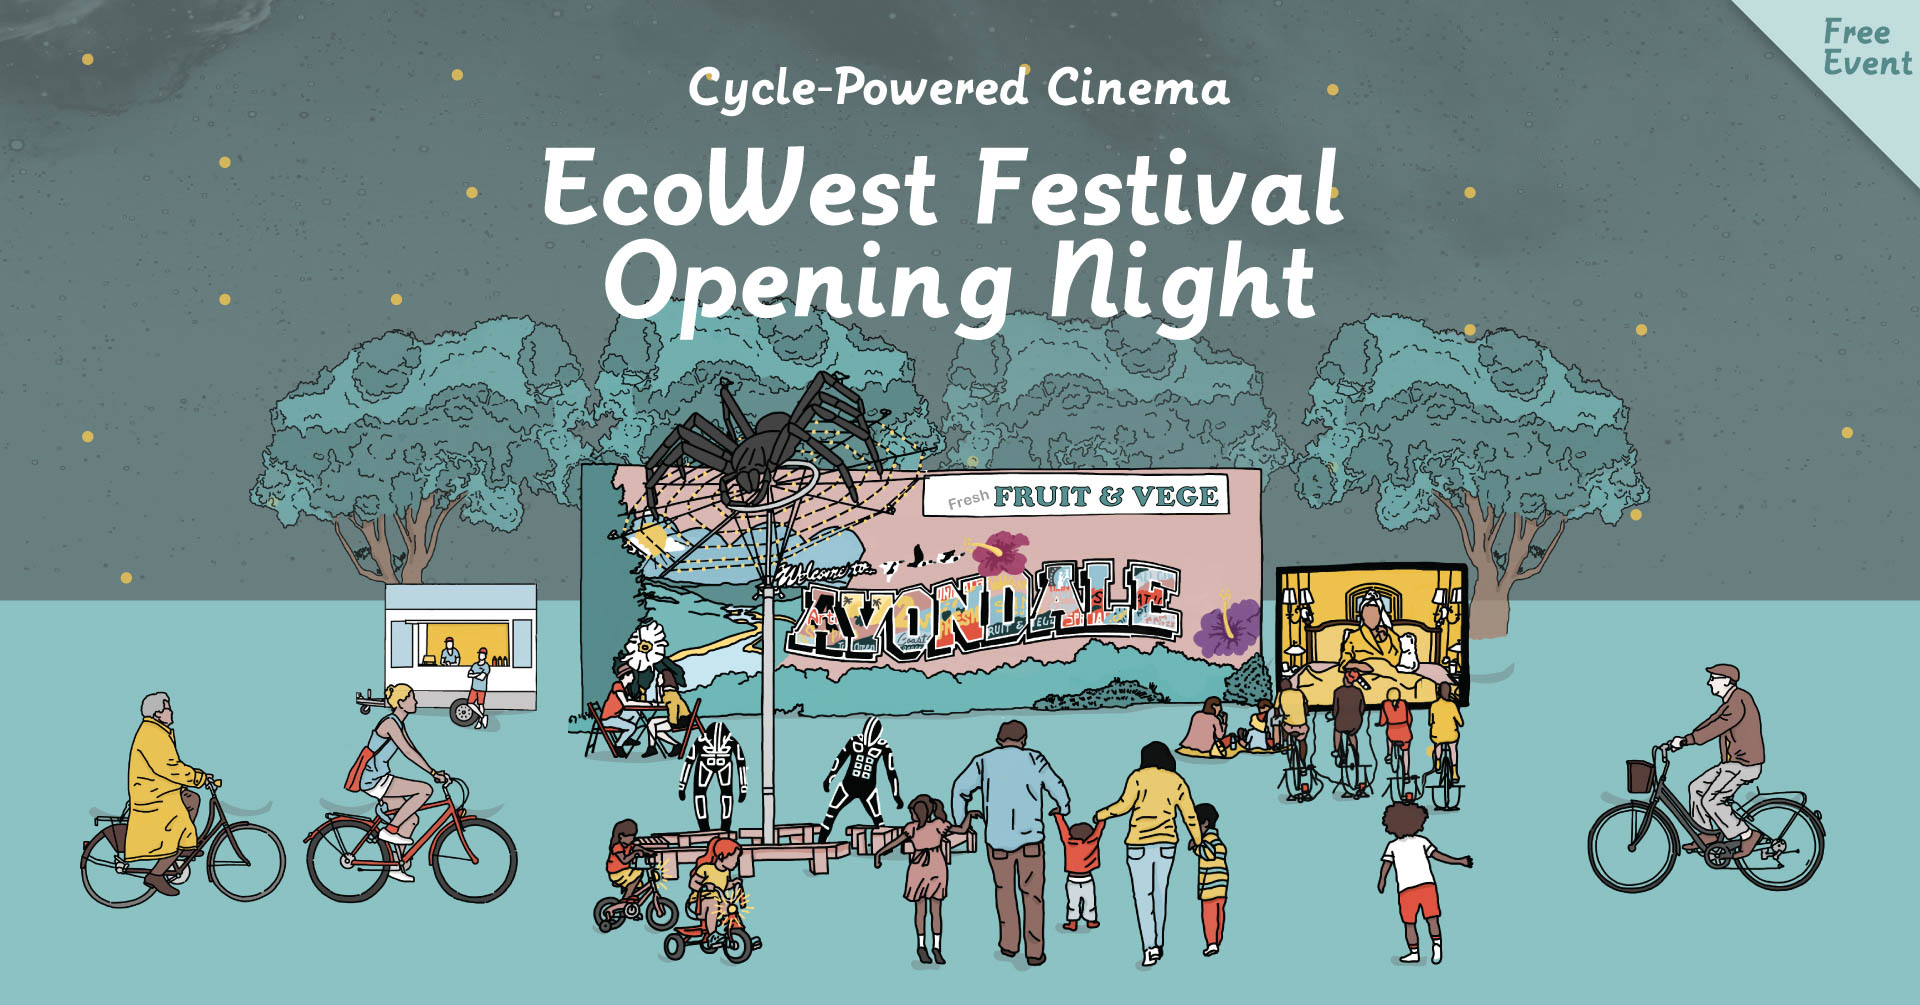 Illustration showing cycle-powered cinema next to the Avondale spider